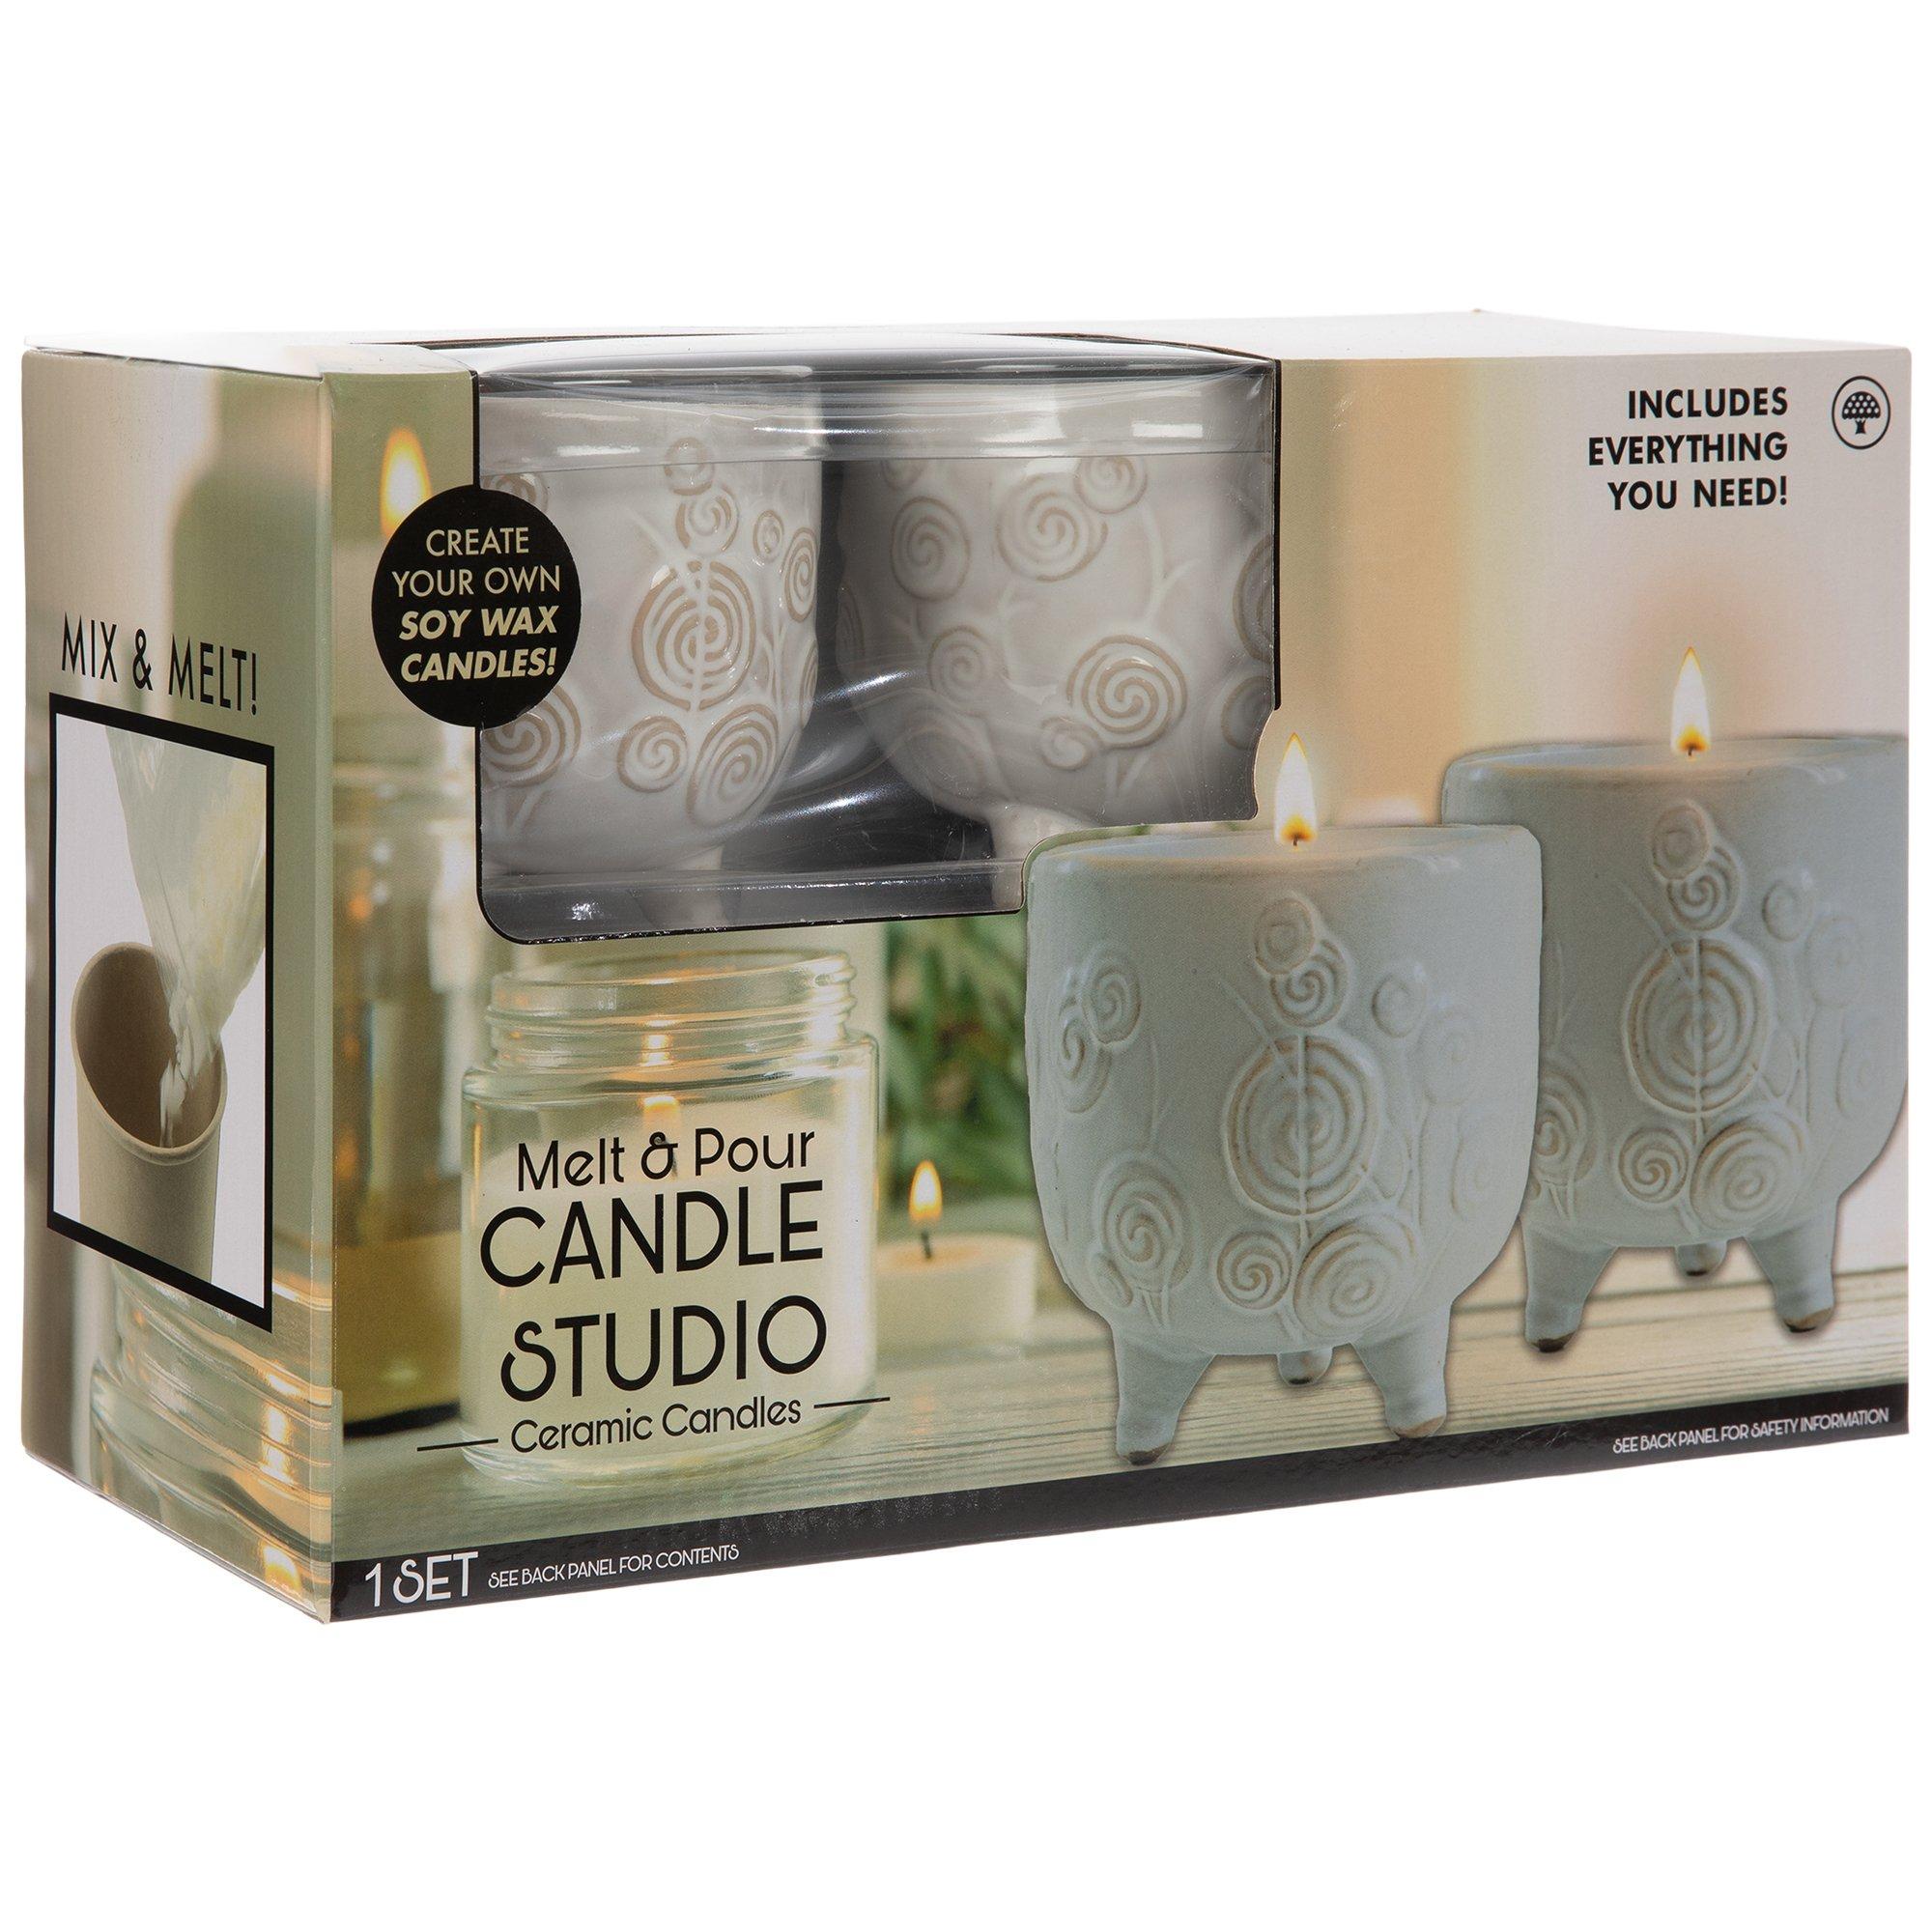 Scented Candles Craft Set, 1set Diy Candle Making Kit, Small